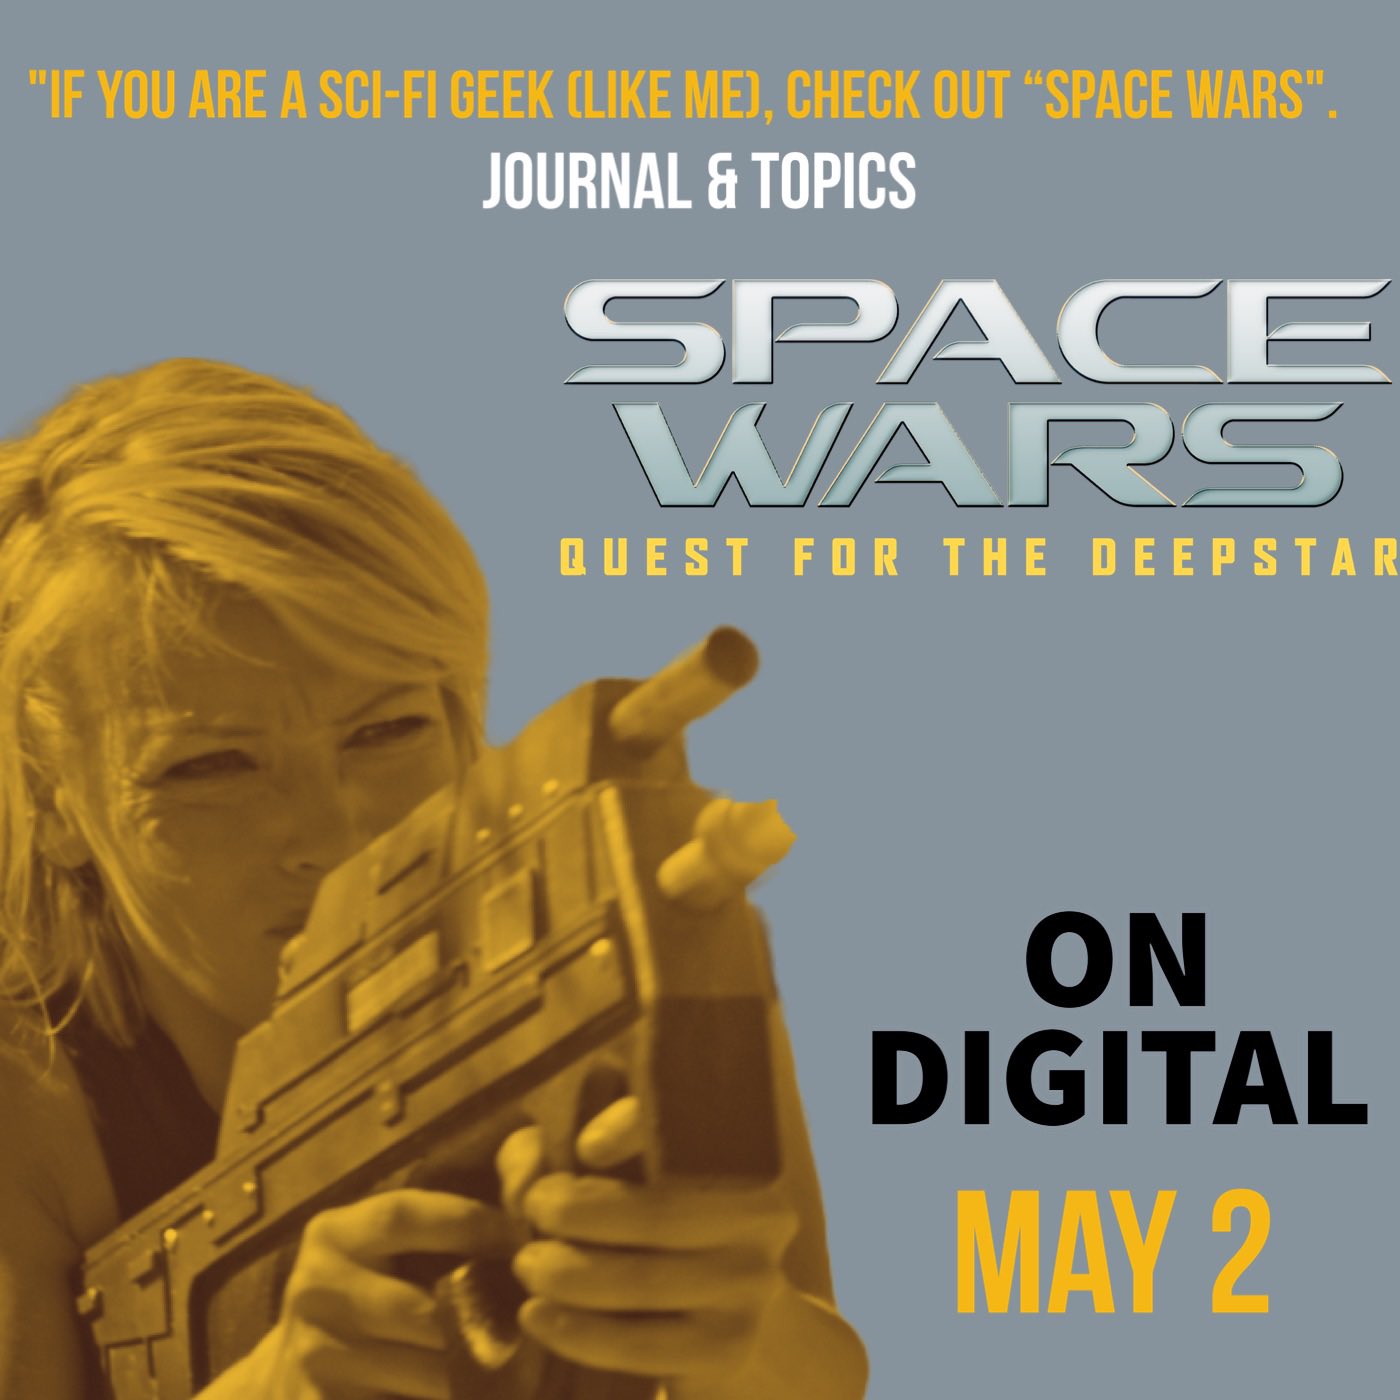 Space Wars: Quest For The Deepstar - Where to Watch and Stream